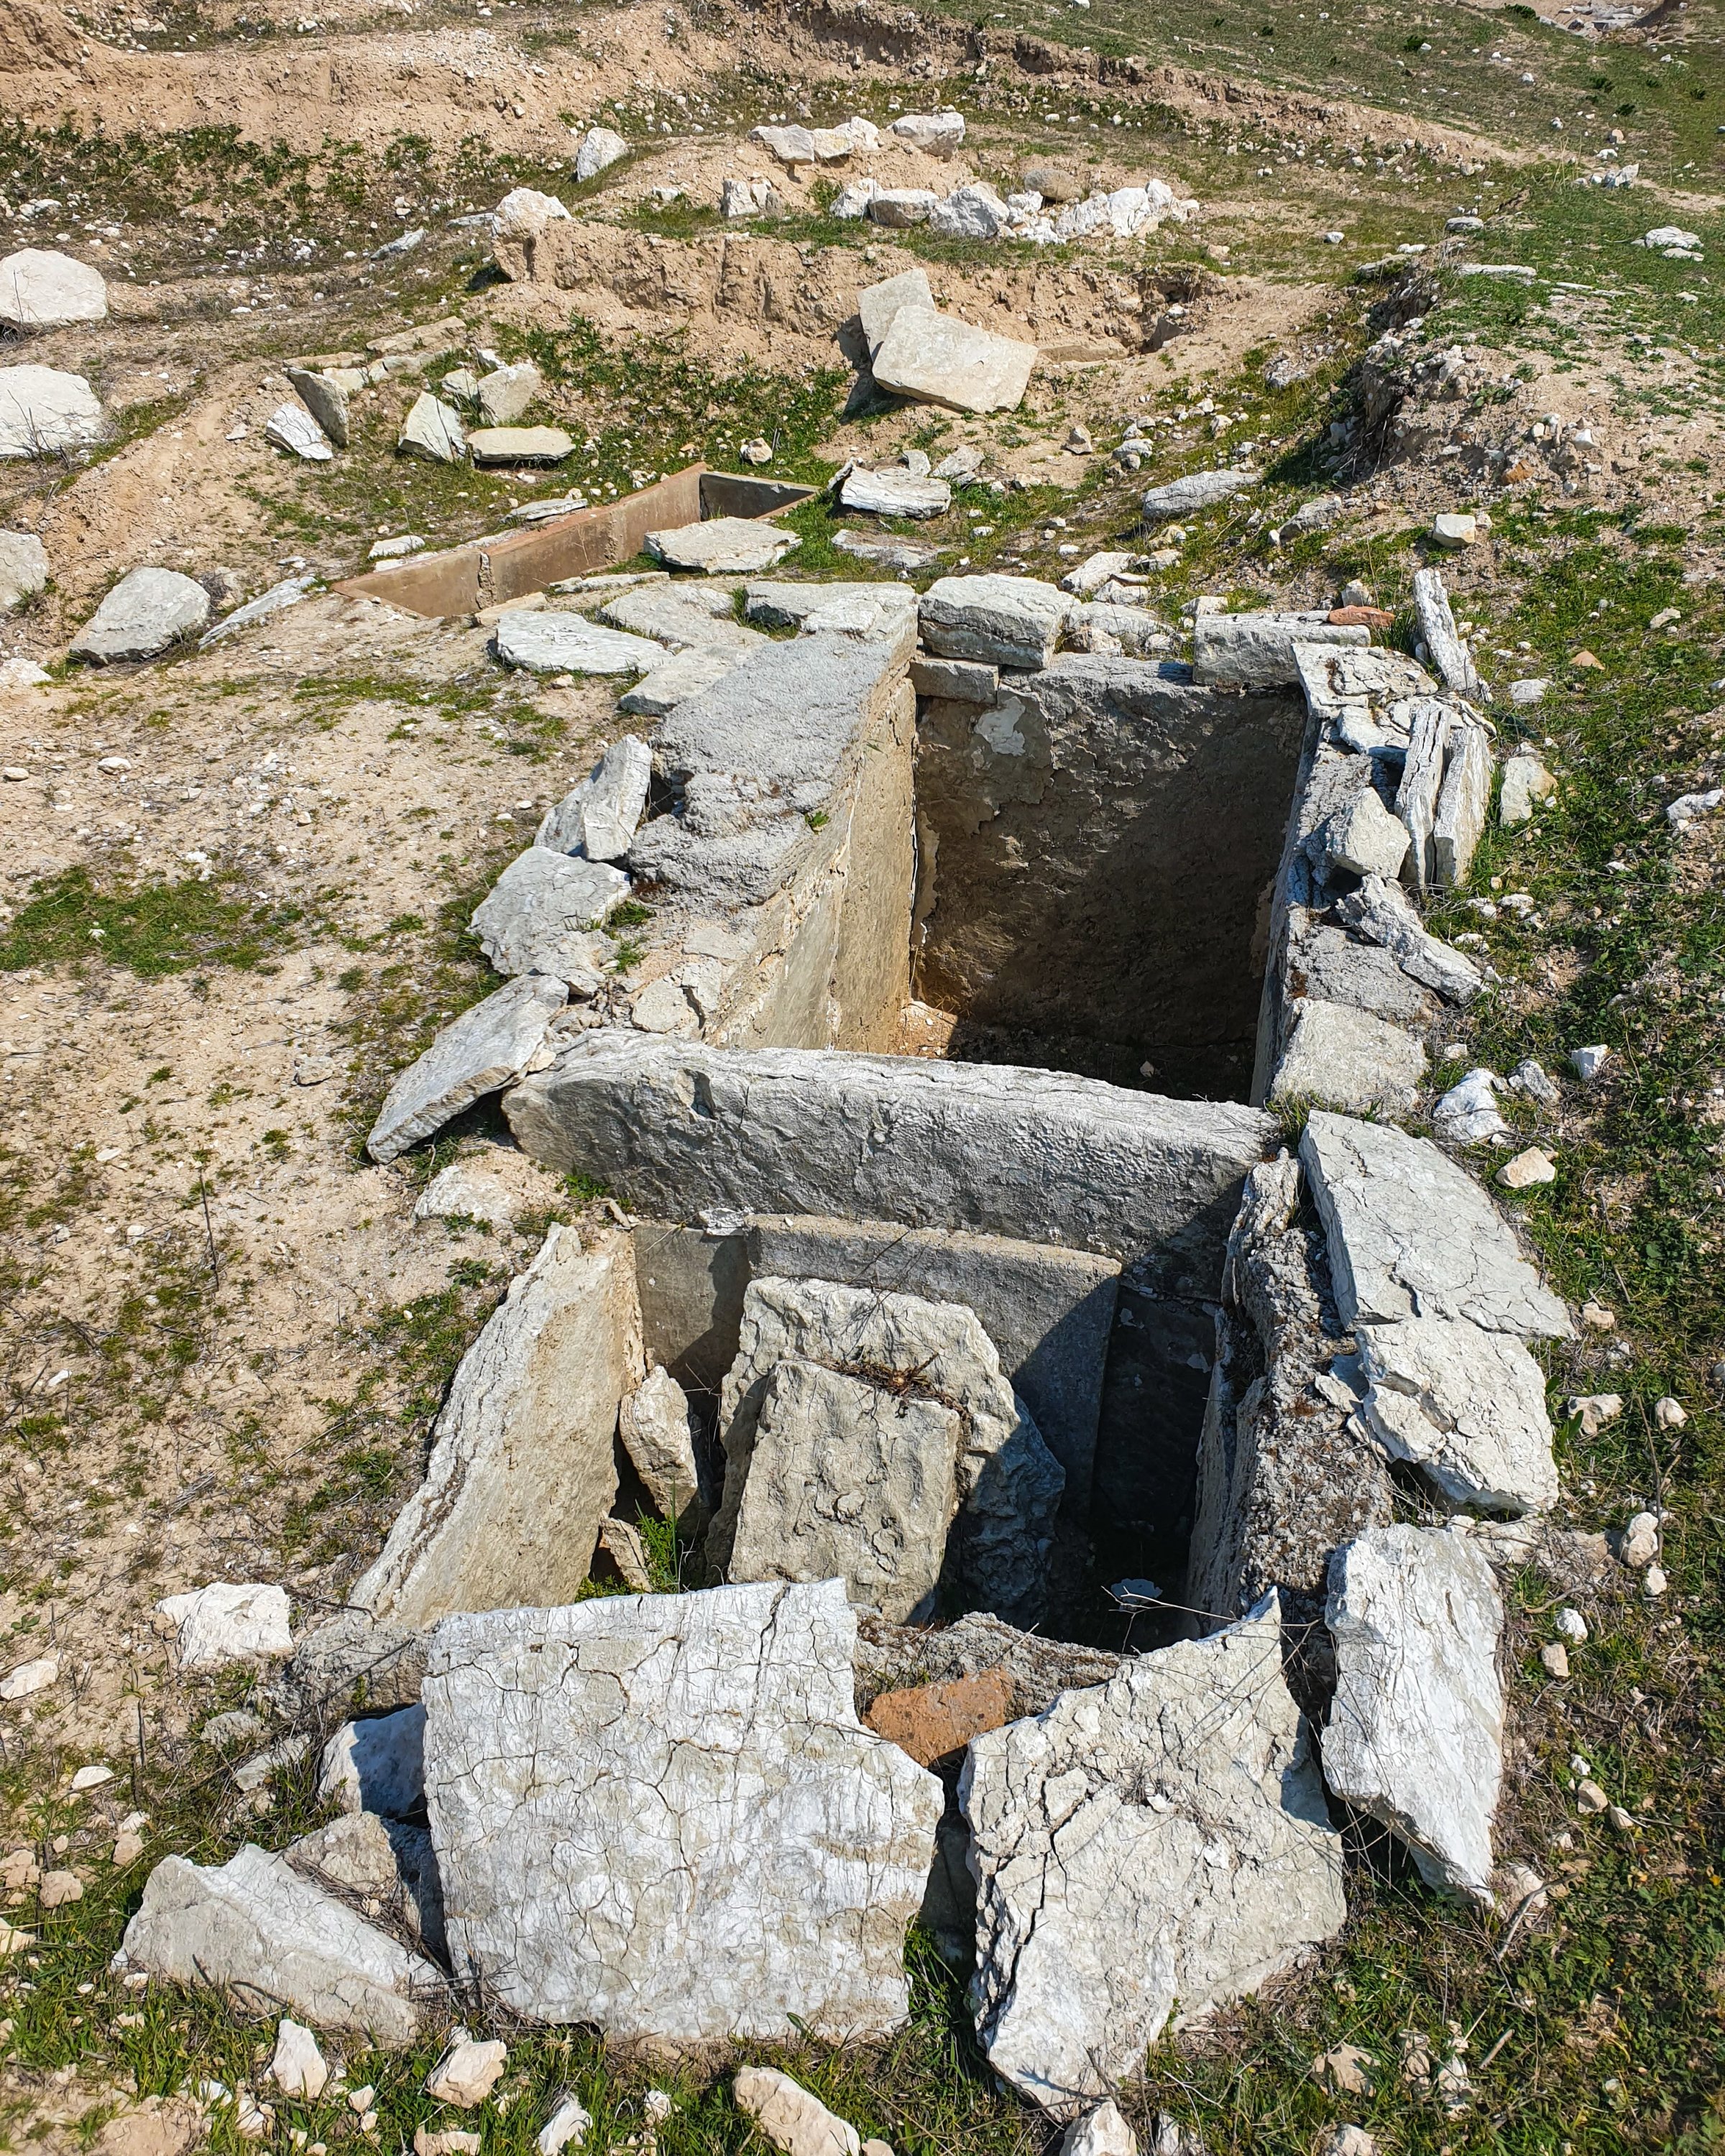 Over 400 graves, including chamber tombs, sarcophagi and cists (pictured), have been discovered in Juliopolis since 2009. (Photo by Argun Konuk)